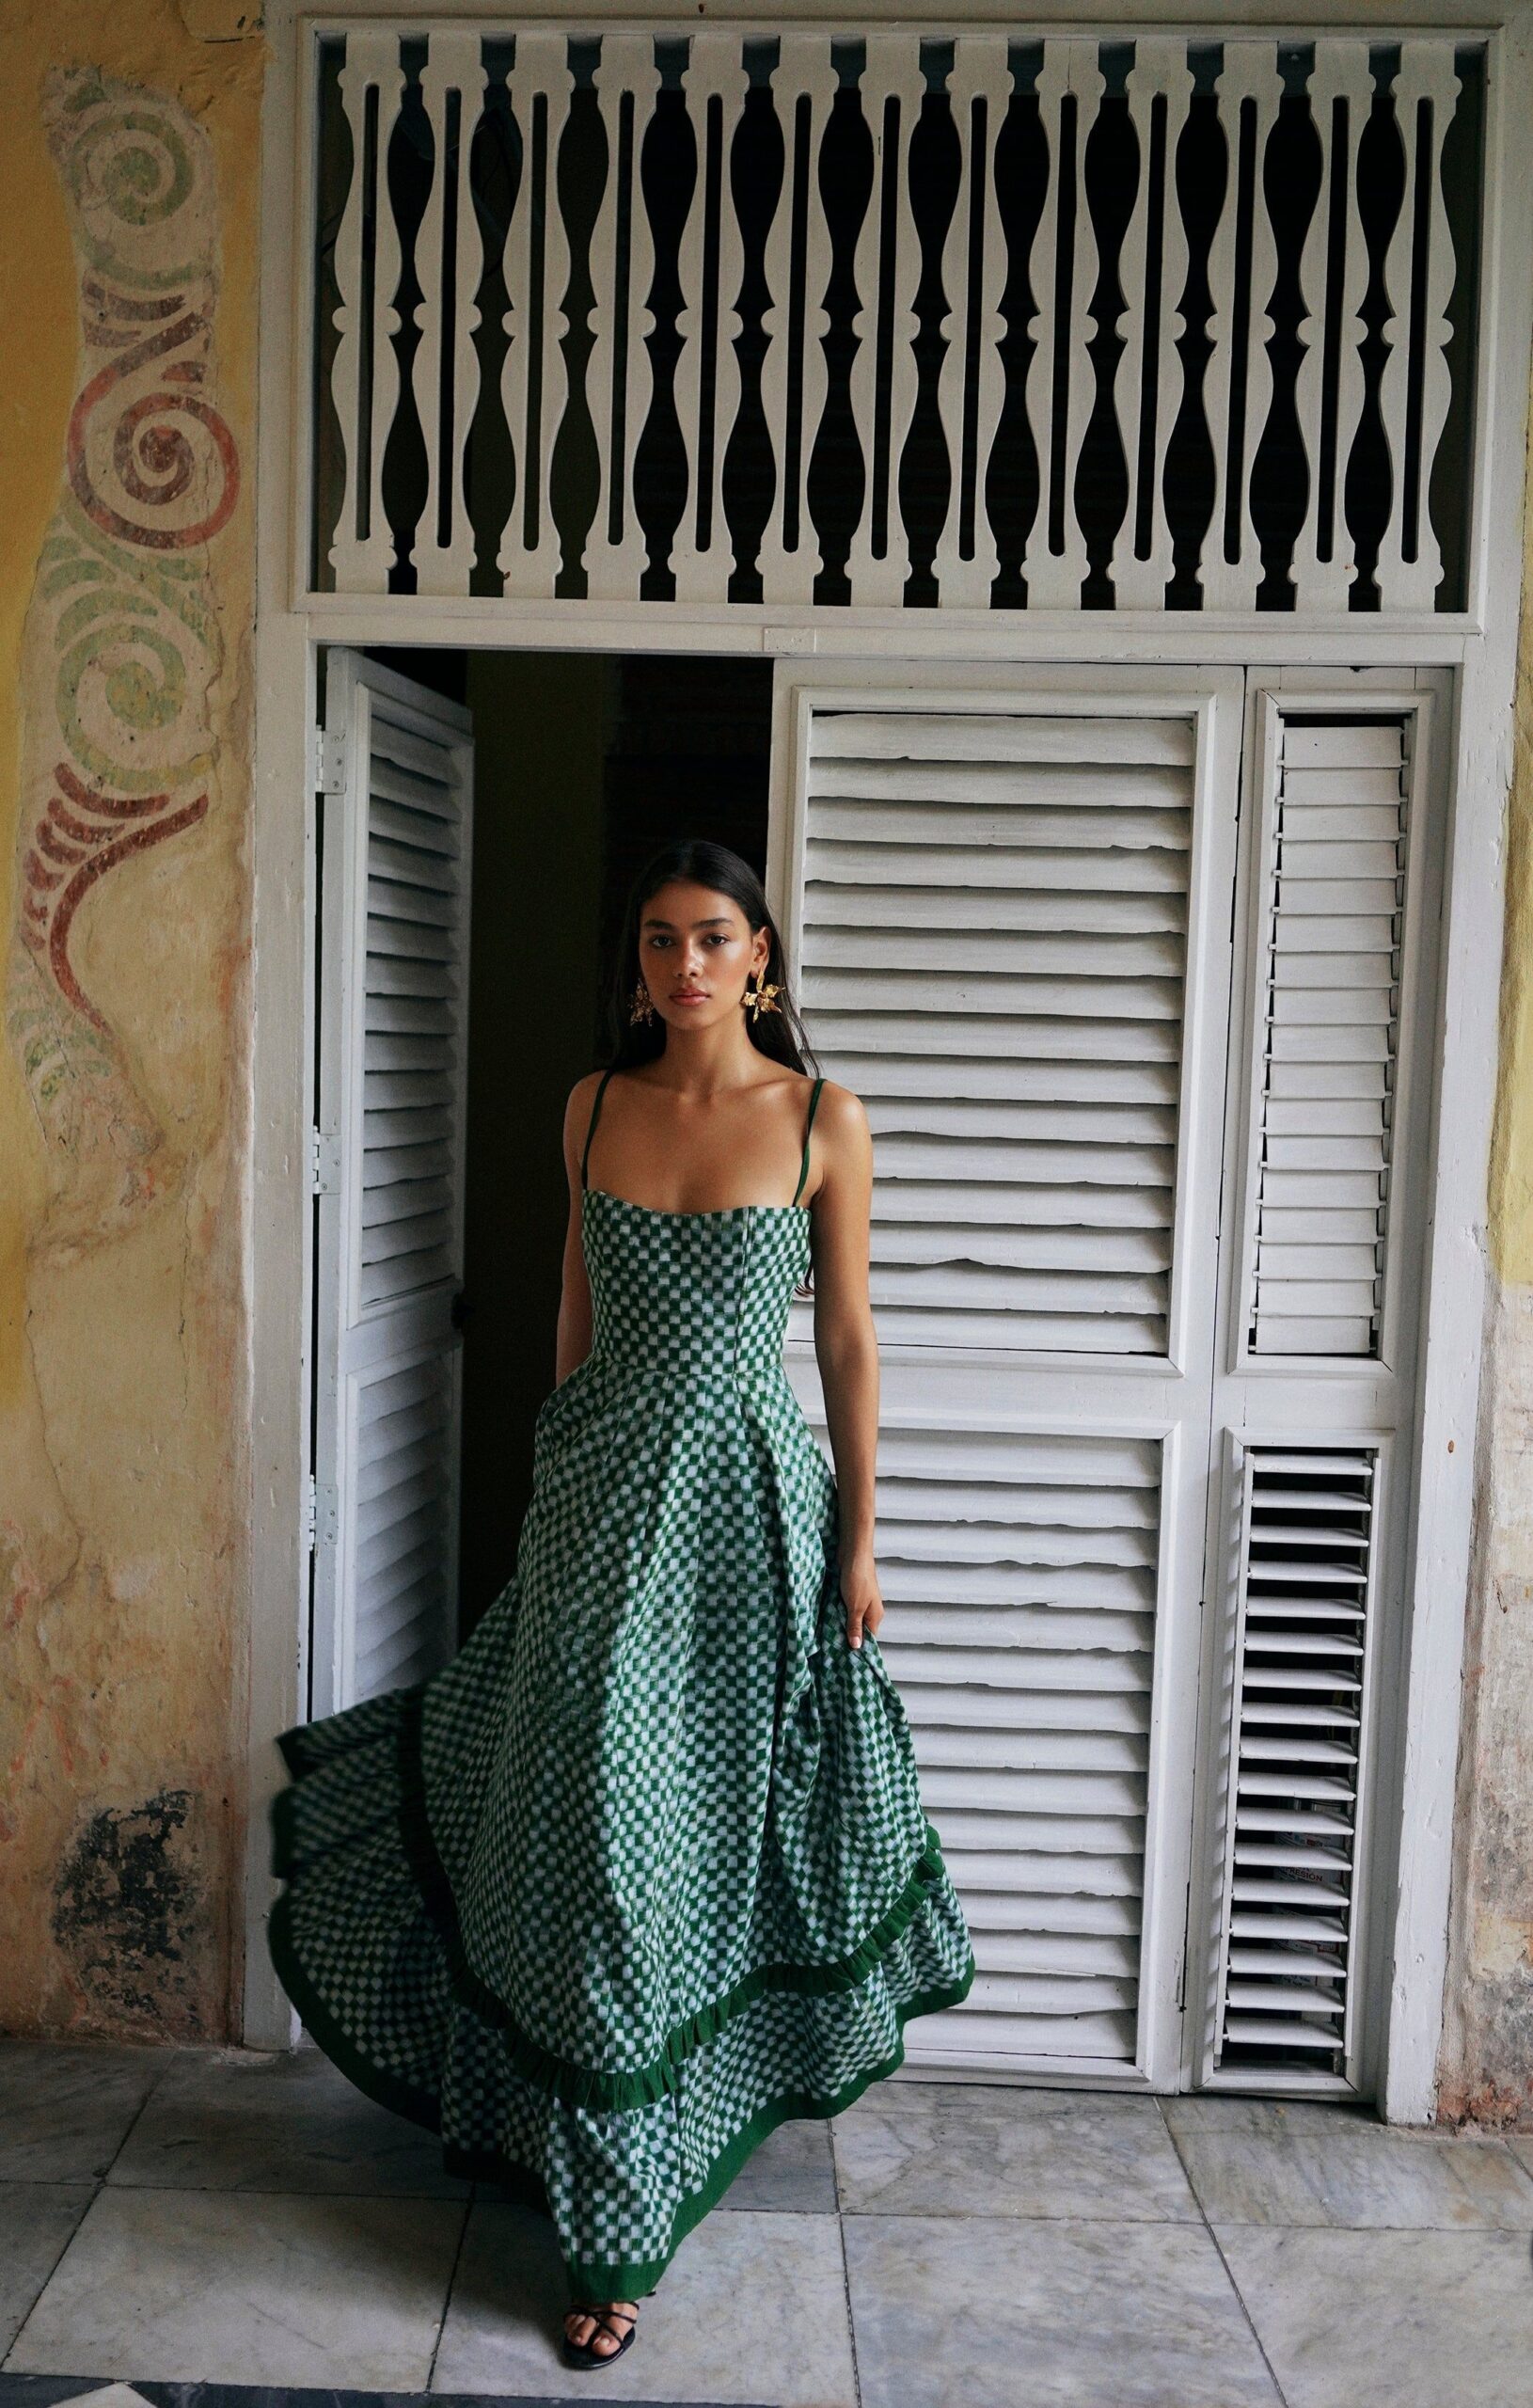 Elegant and Sophisticated: Make a Statement in Long Dresses